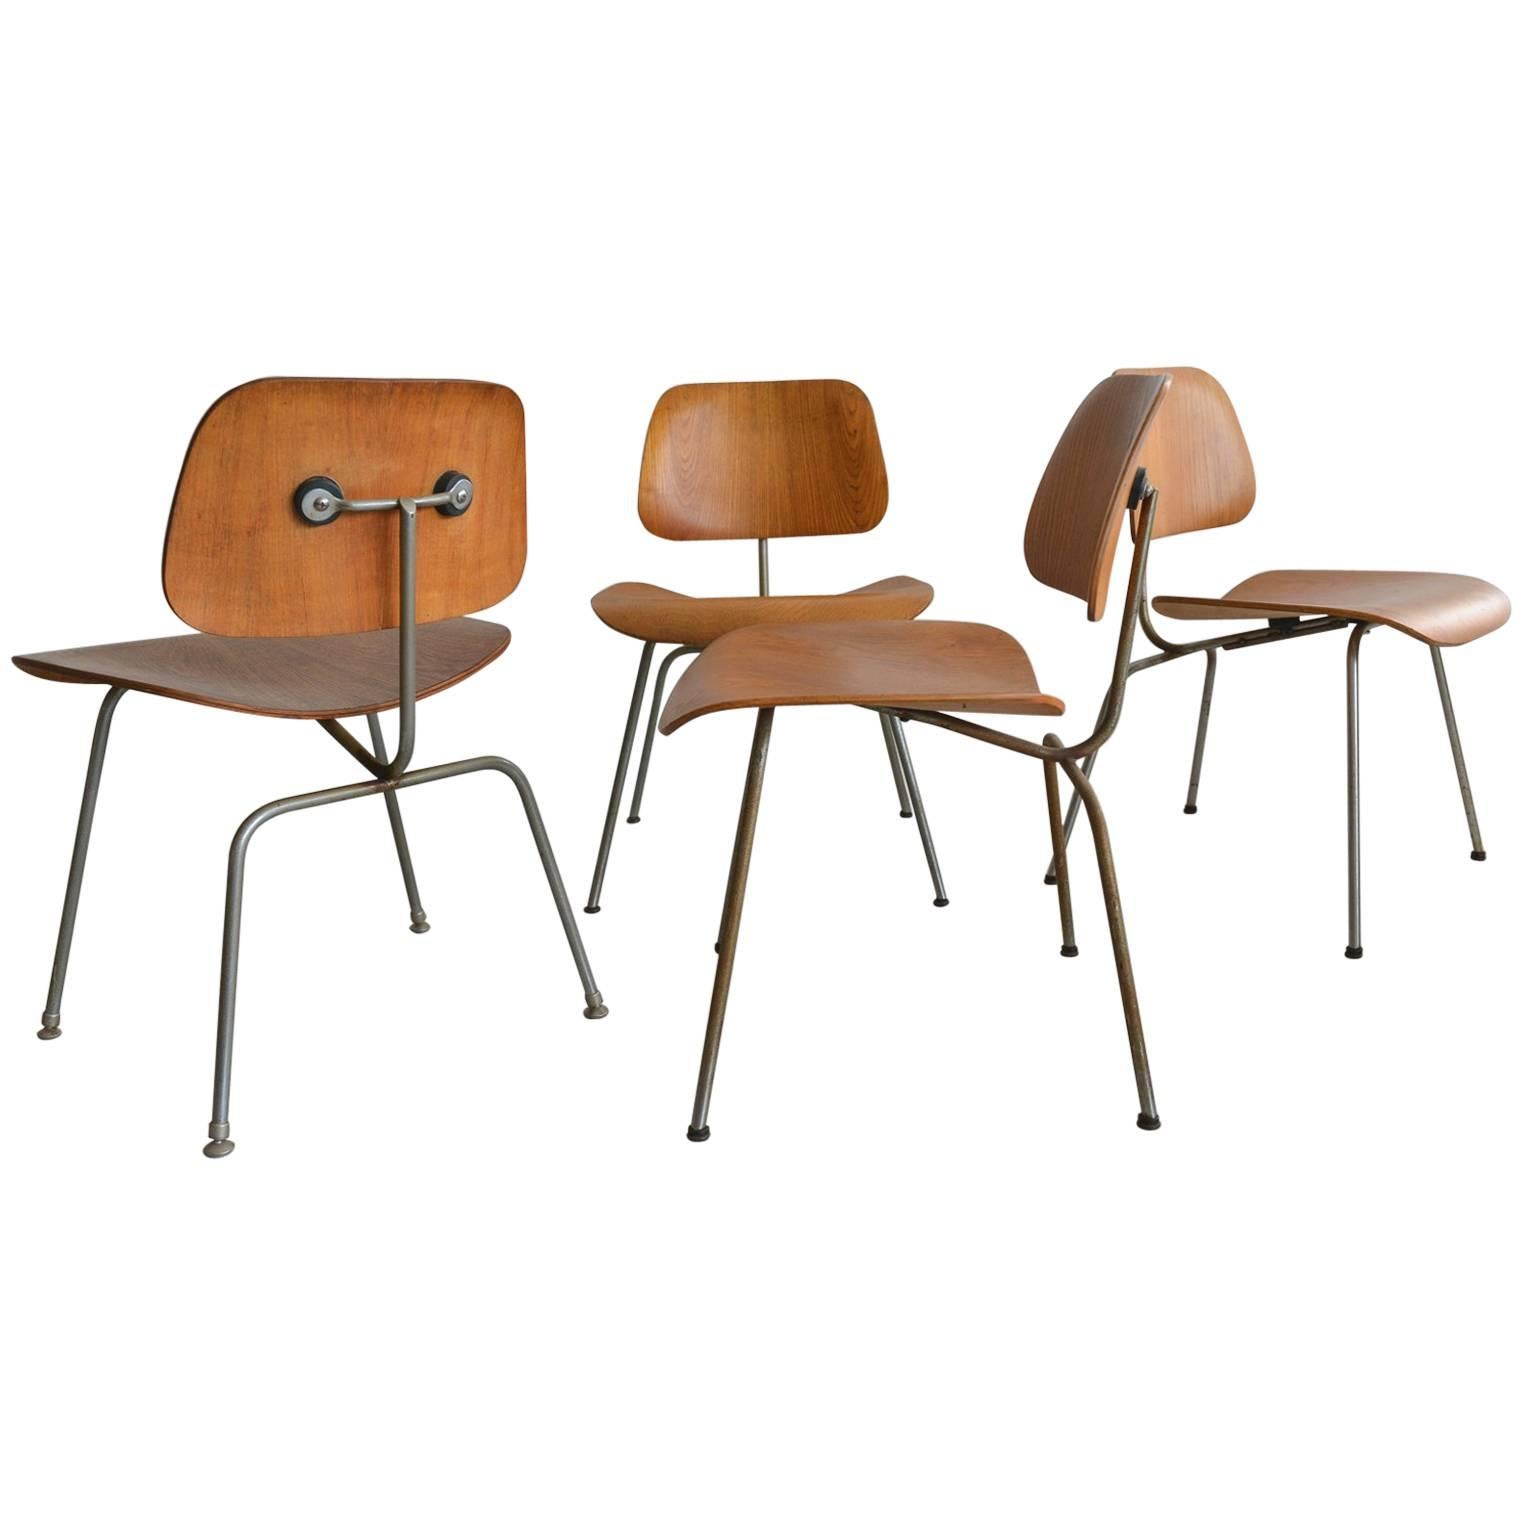 Early Charles Eames DCM Dining Chairs